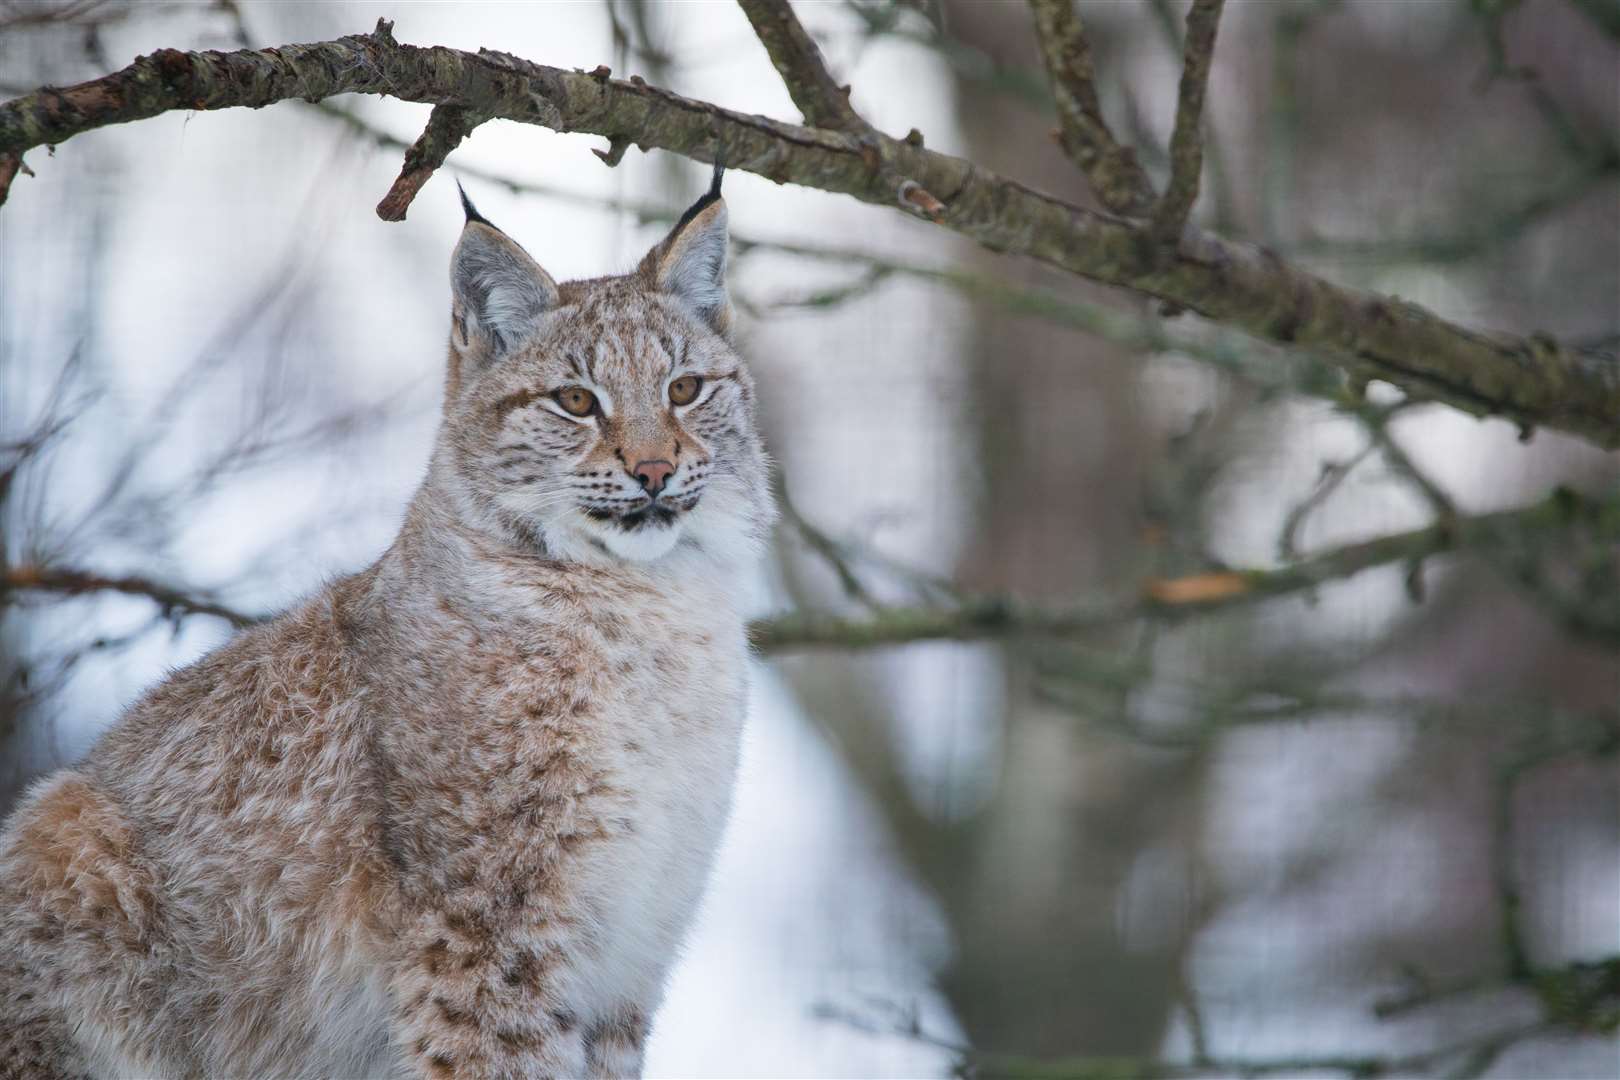 Experts to discuss the reintroduction of Eurasian lynx to Scotland